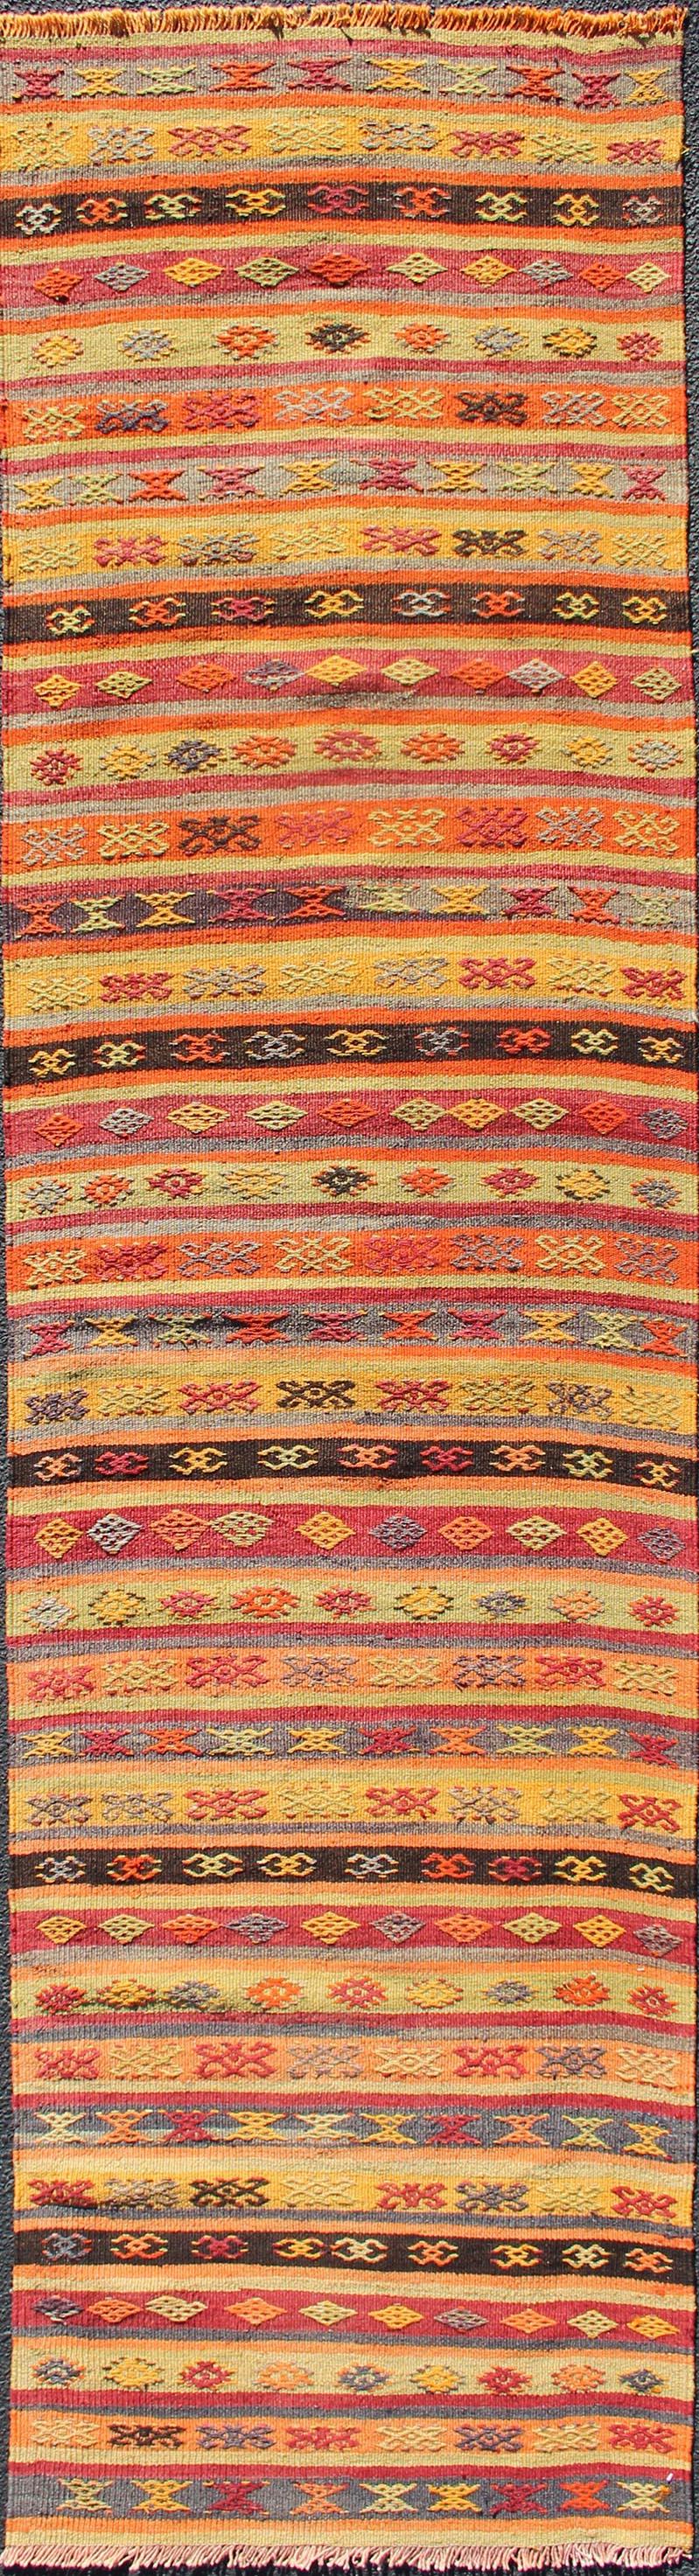 Hand-Woven Vintage Turkish Kilim Colorful Stripe Runner with Tribal Motifs For Sale